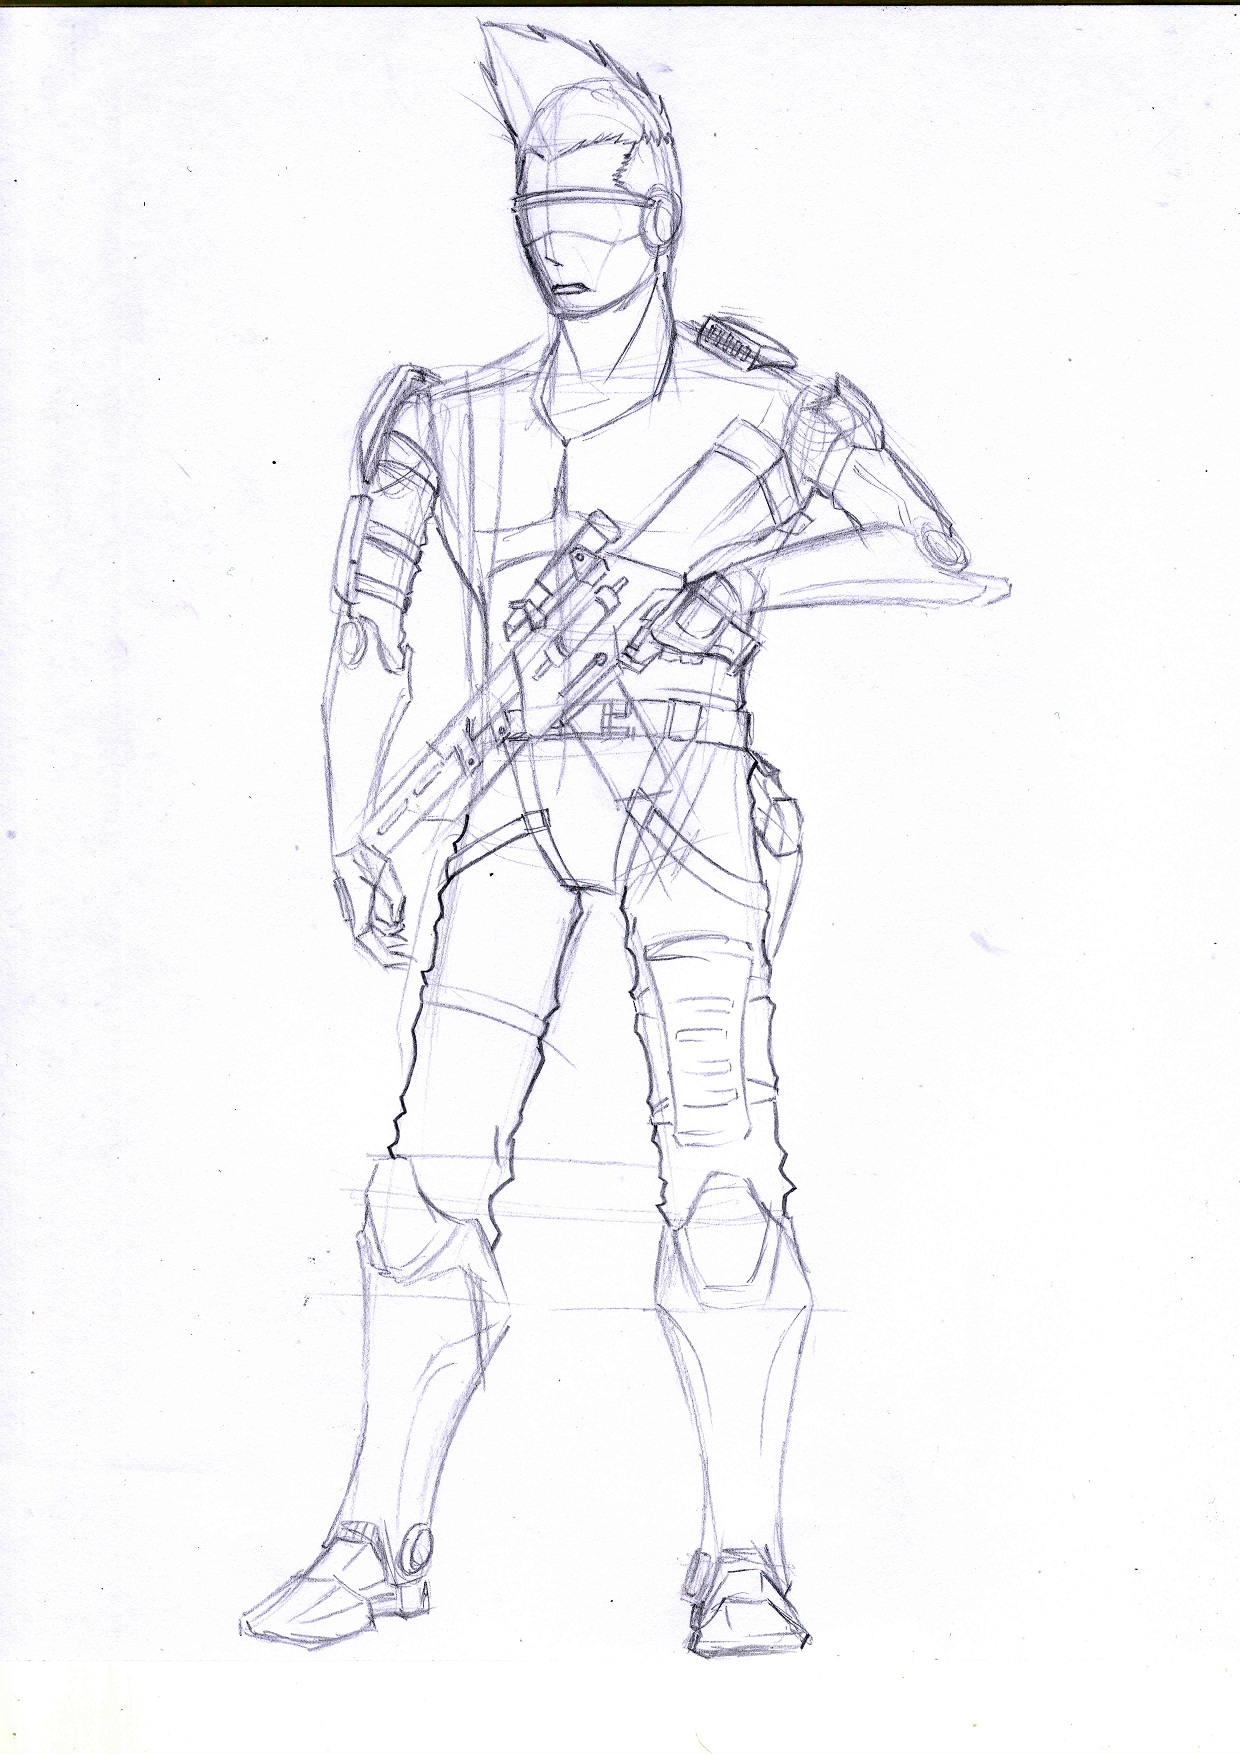 TACTICAL MAD -lowres sketch-.jpg